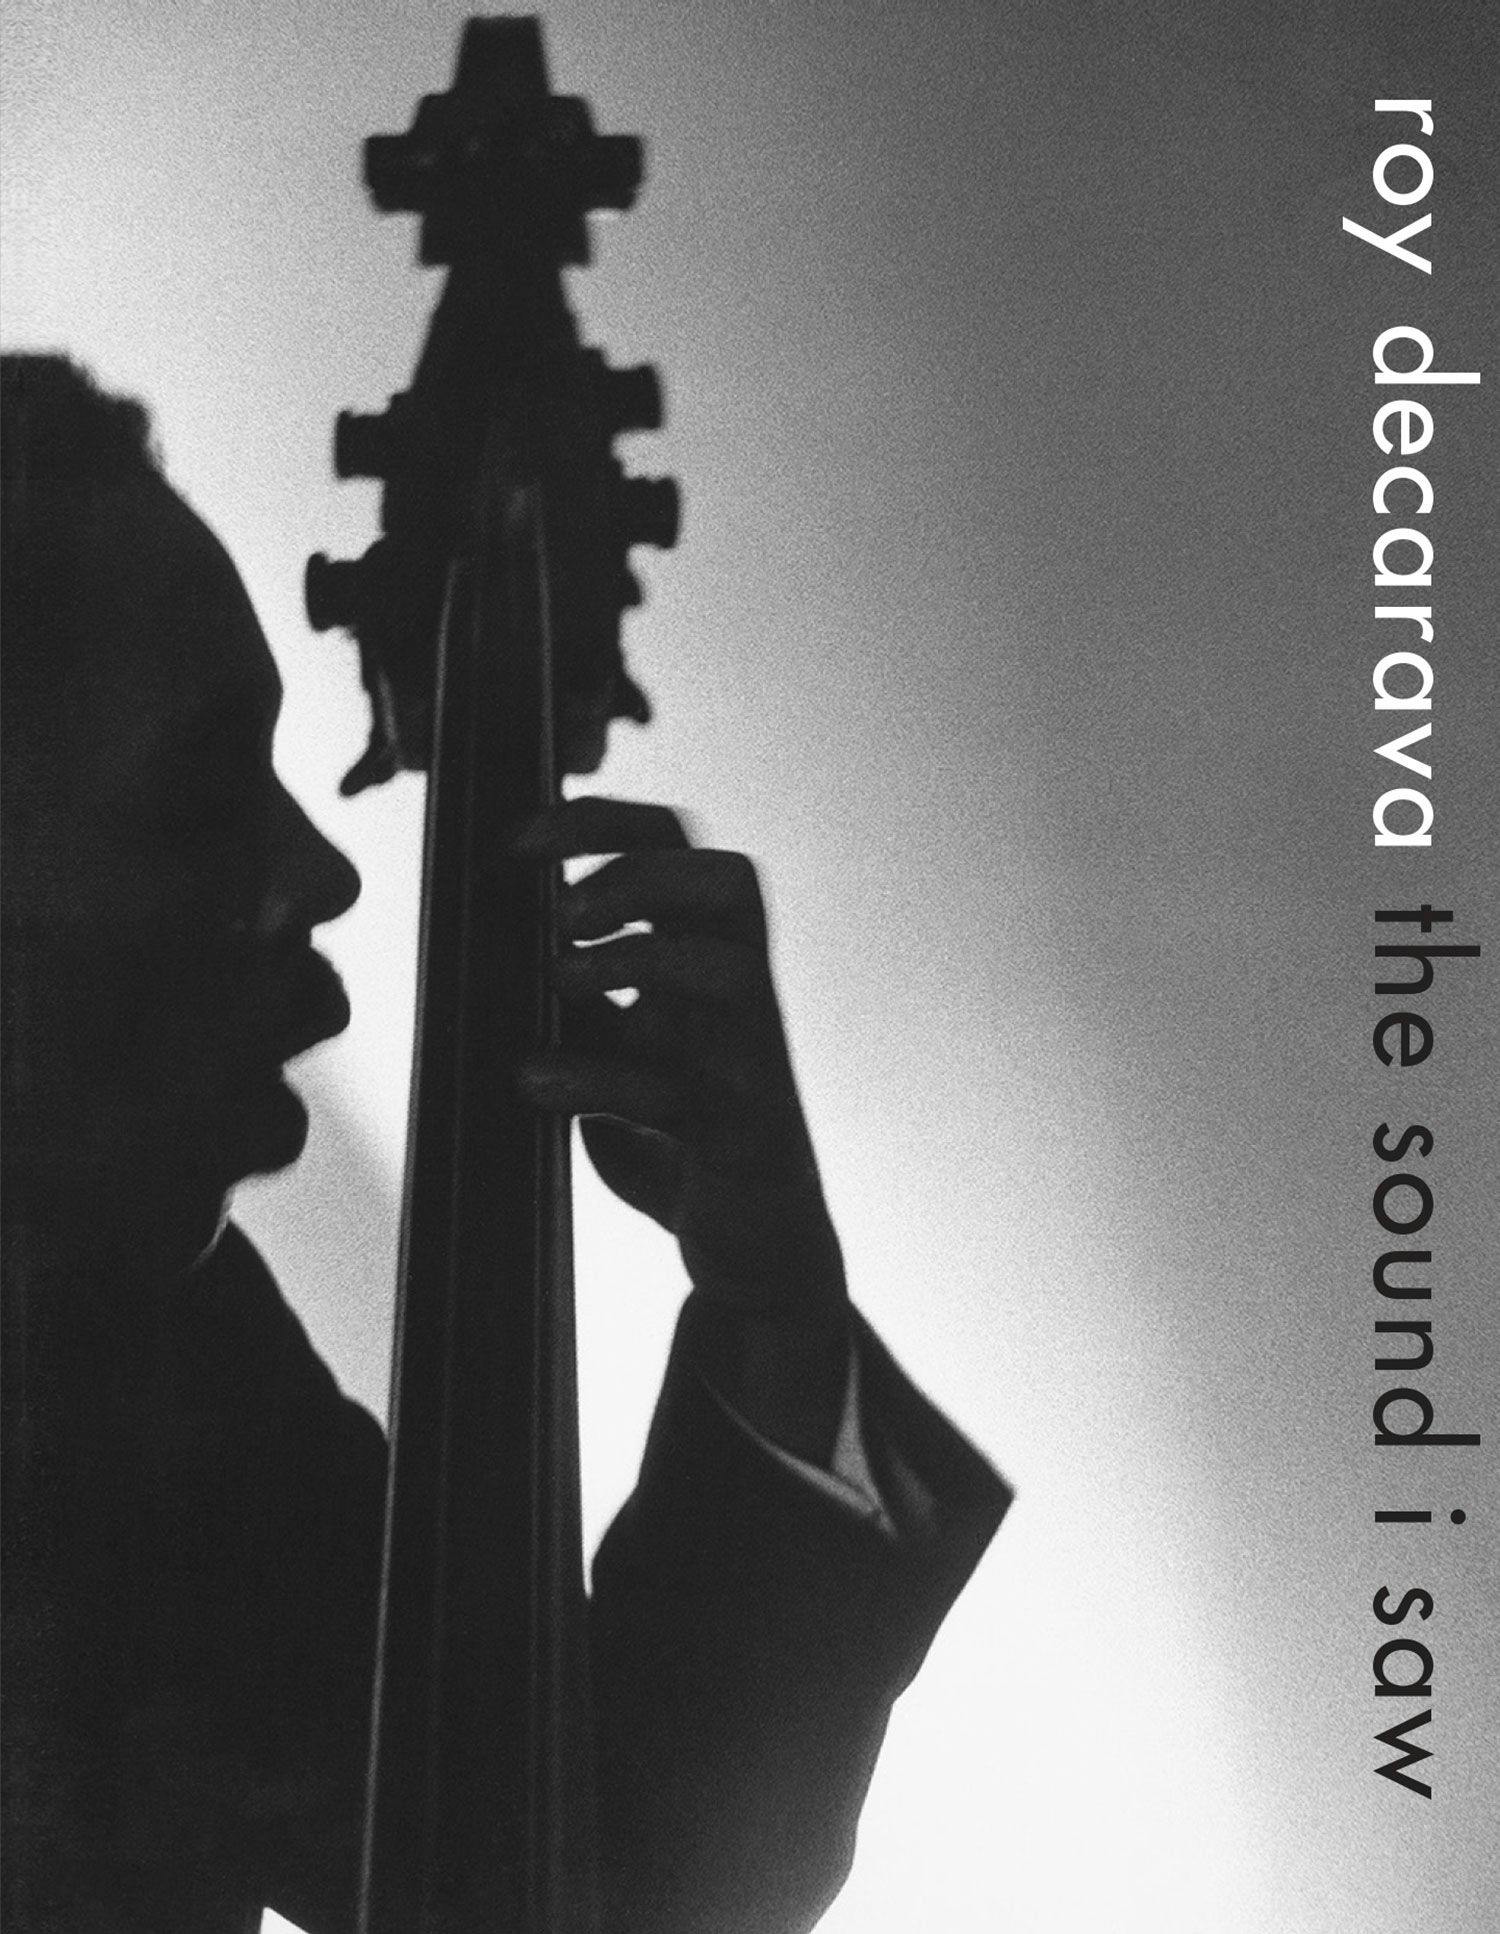 The cover of a book, titled Roy DeCarava: the sound i saw